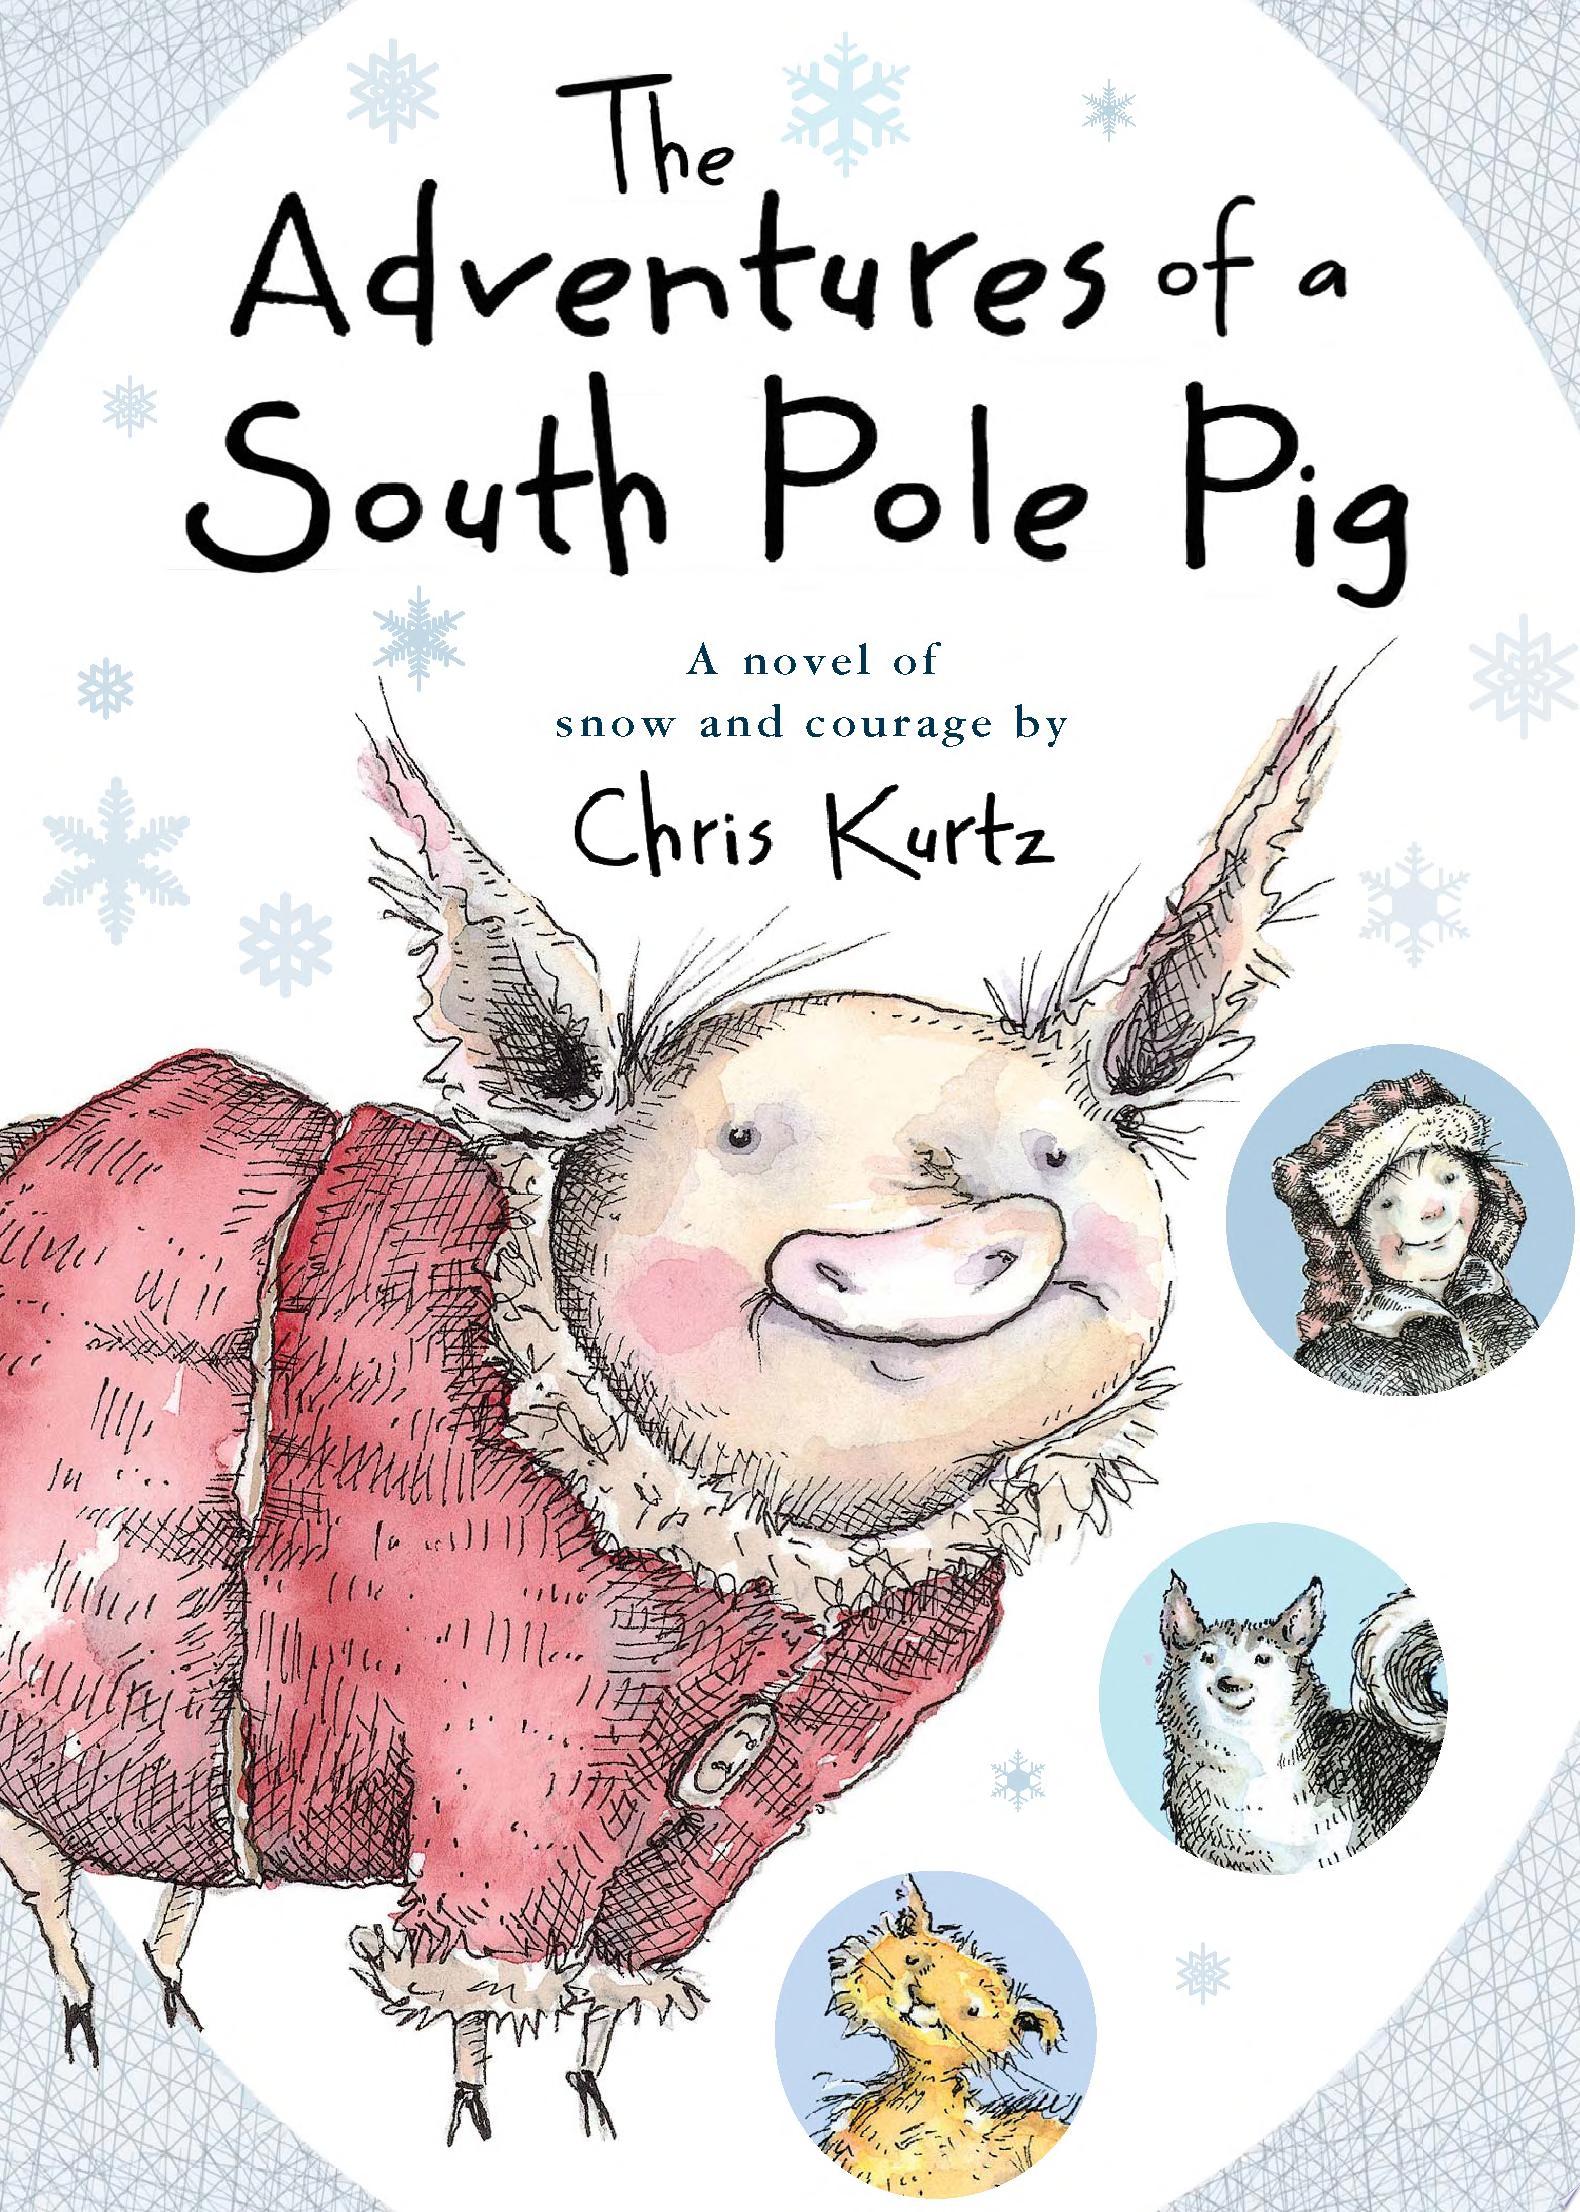 Image for "The Adventures of a South Pole Pig"